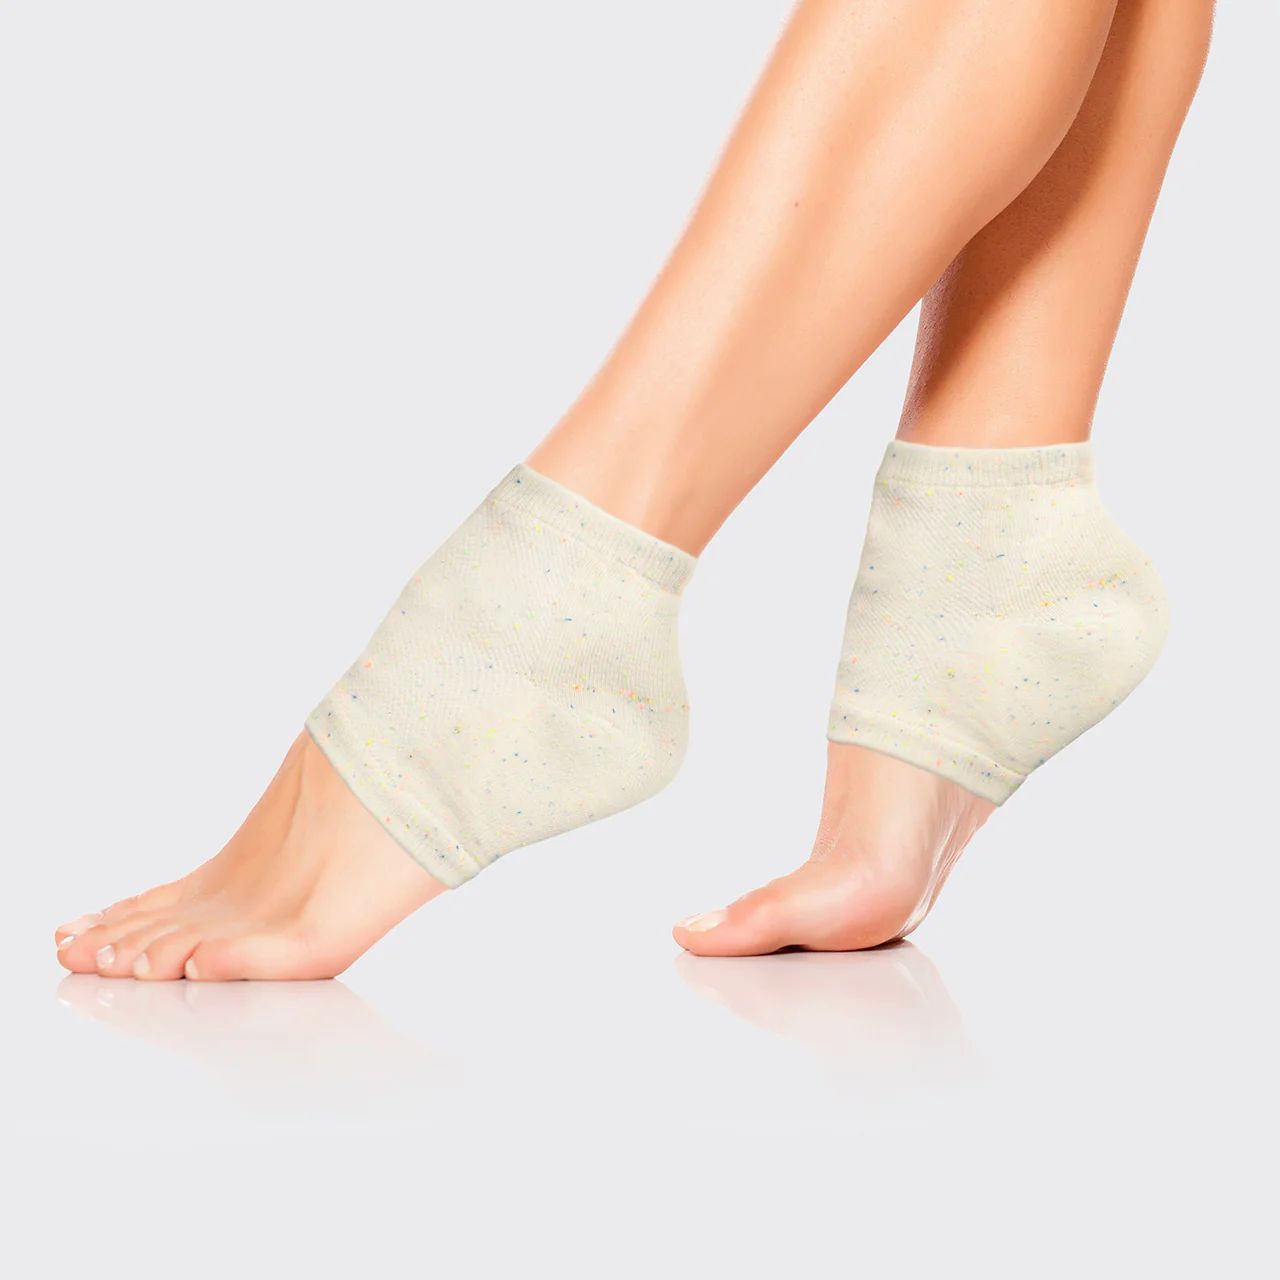 Order Moisturizing Spa Socks and Enjoy Free Shipping on Purchases of $35 or More | Kitsch